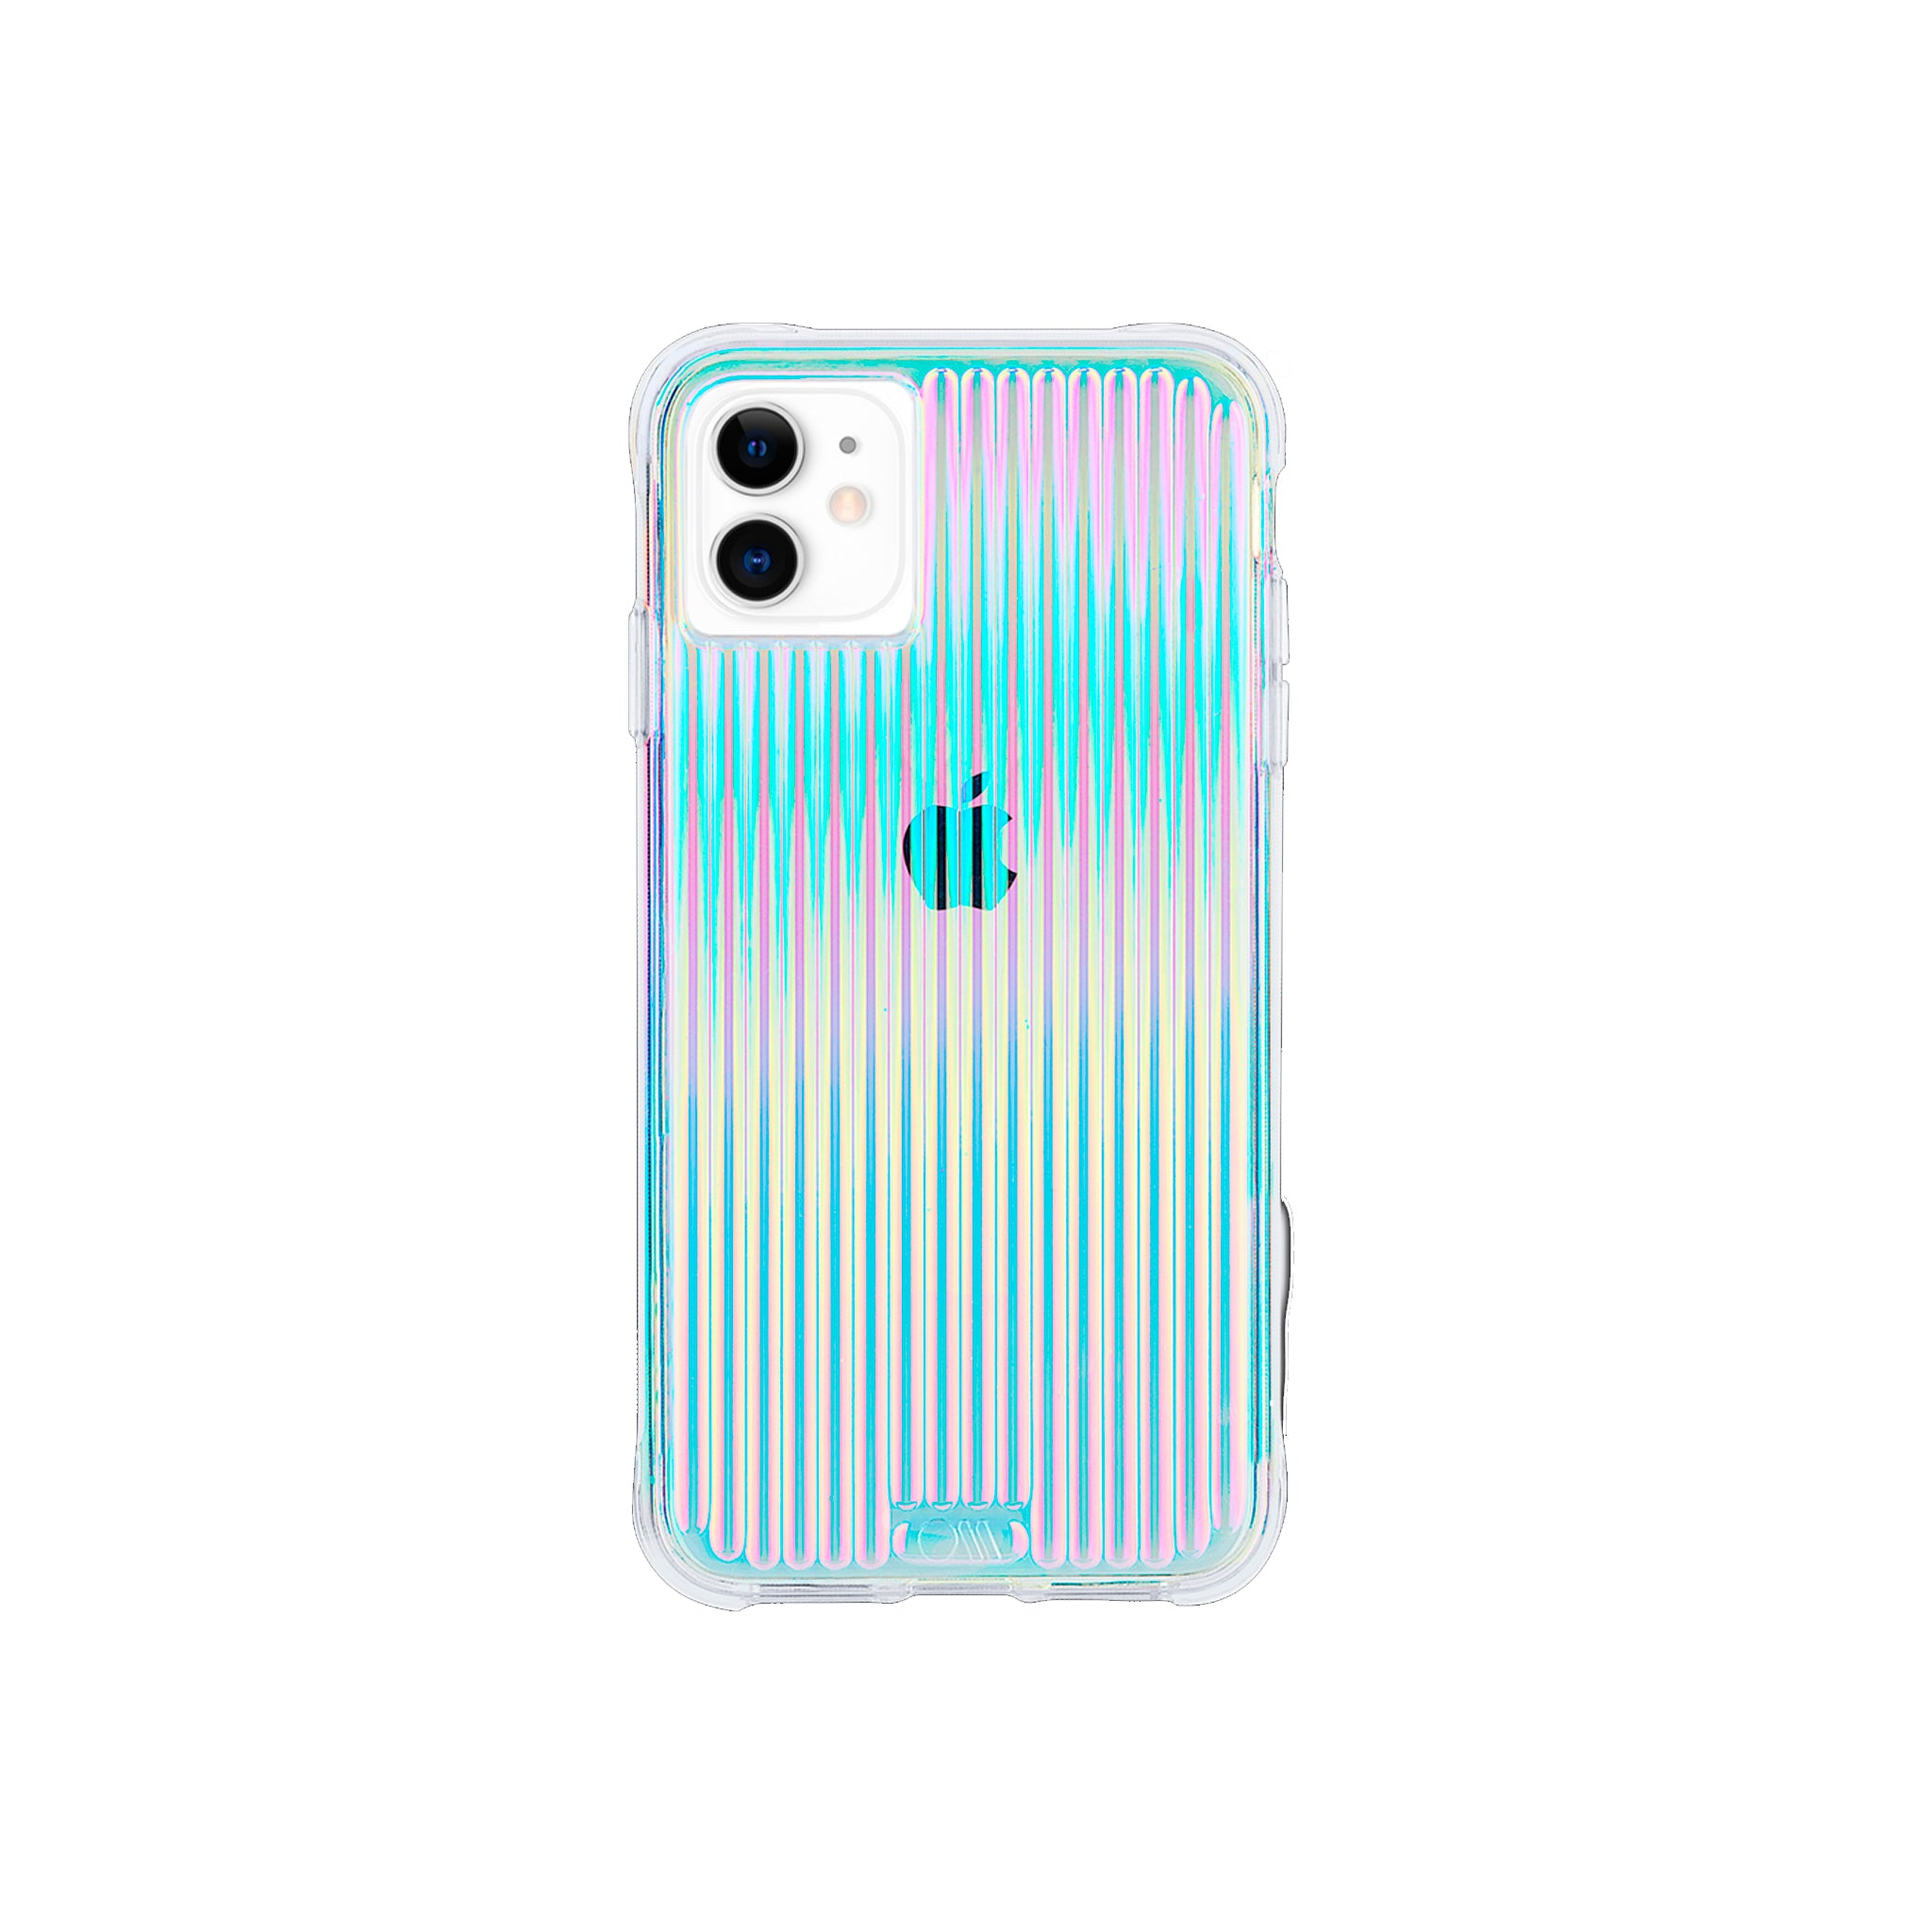 Case-mate - Tough Groove Case For Apple iPhone 11 - Iridescent